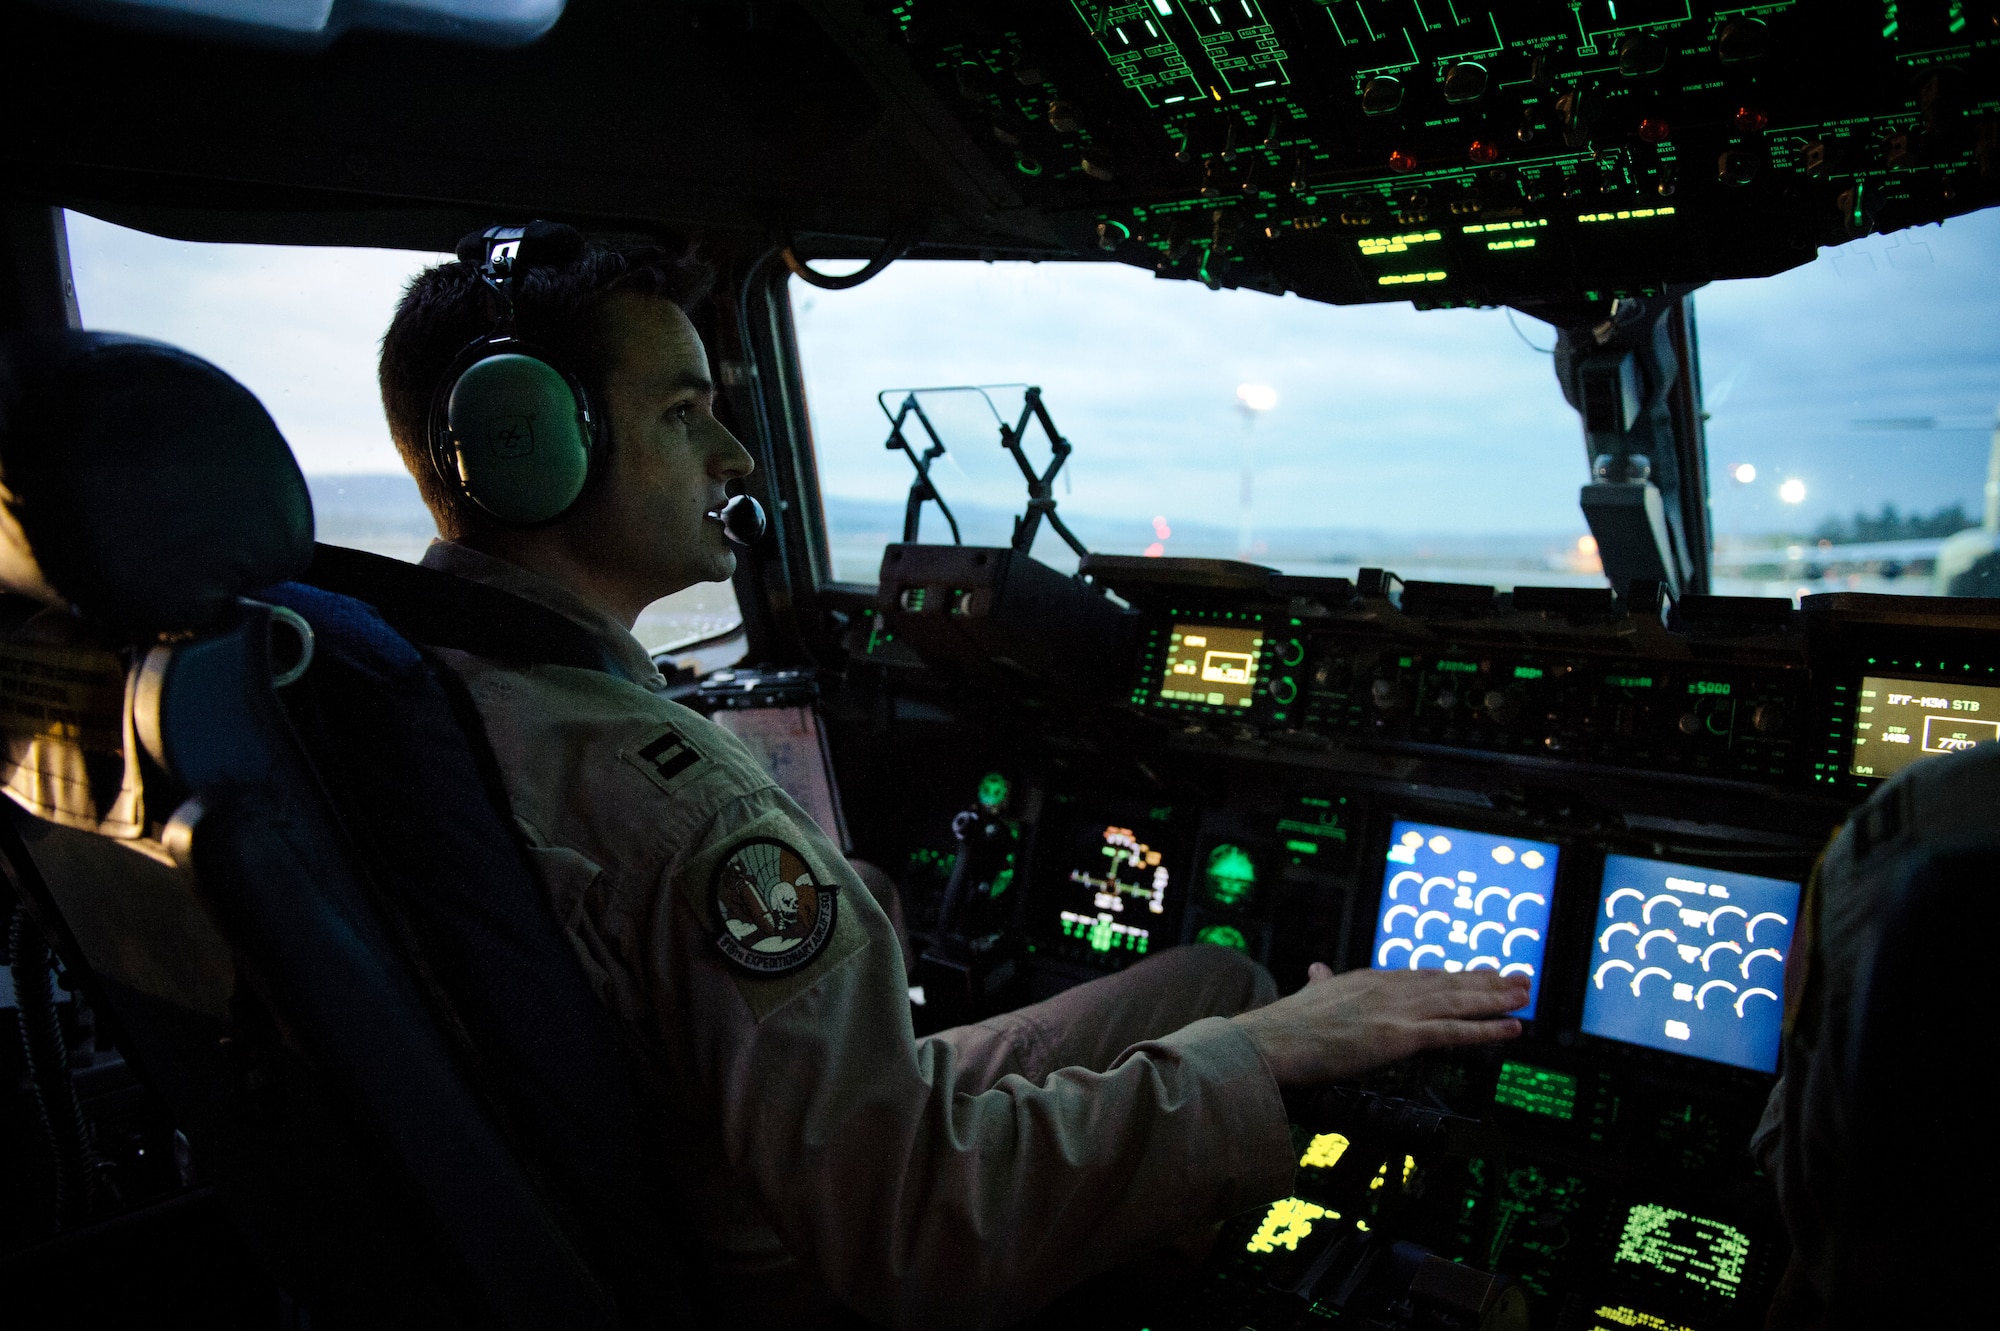 RAMSTEIN AIR BASE, Germany – Capt. Tyrus Scott, 816th Expeditionary Airlift Squadron pilot, taxis his C-17 Globemaster III for take-off April 27, 2012. (U.S. Air Force photo/Staff Sgt. Nathanael Callon)